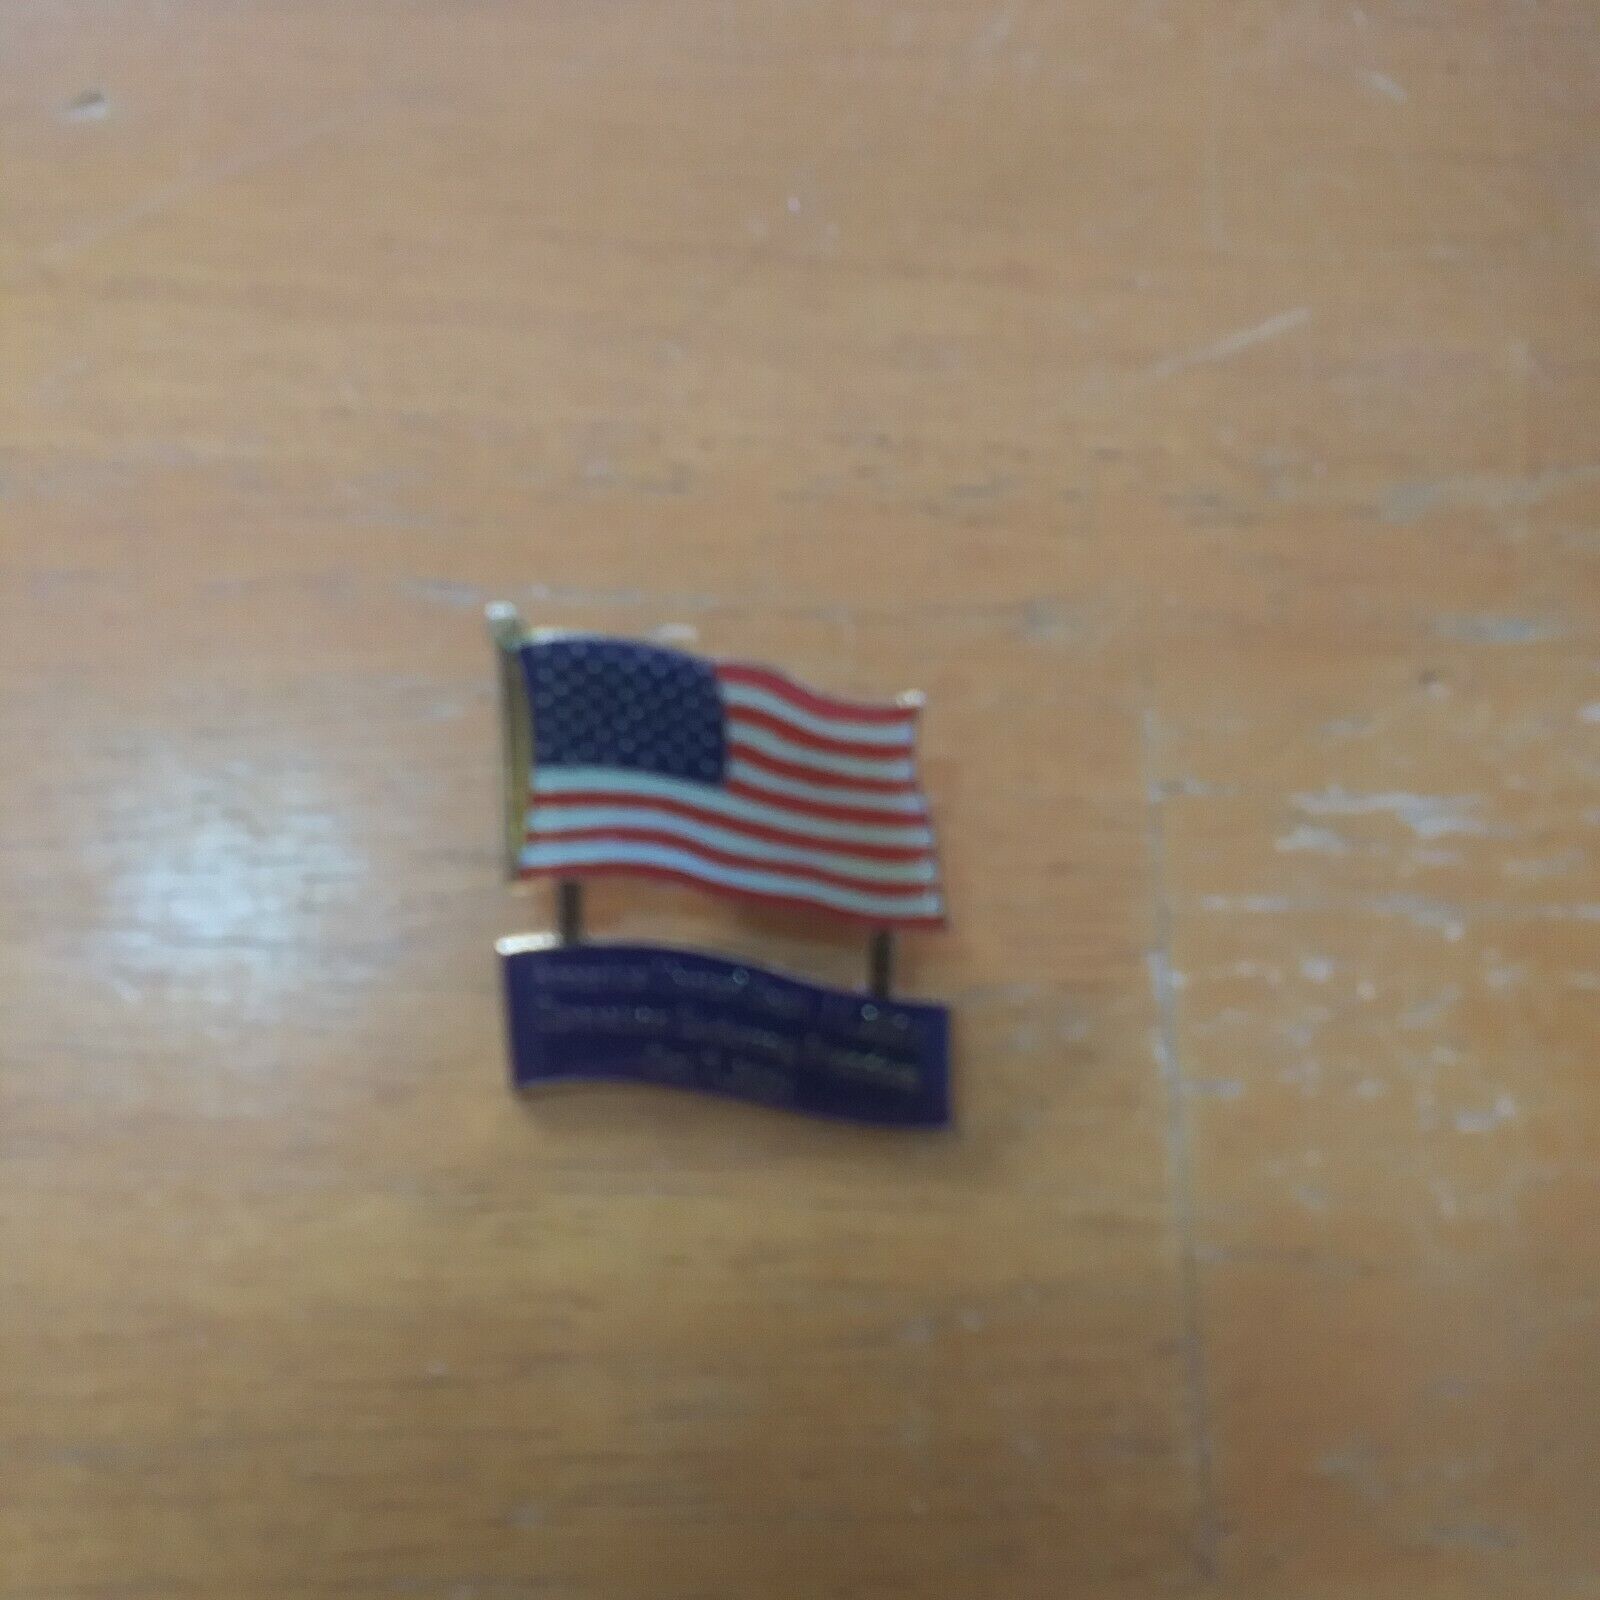 Operation Enduring Freedom American United September 11 Pin 2001